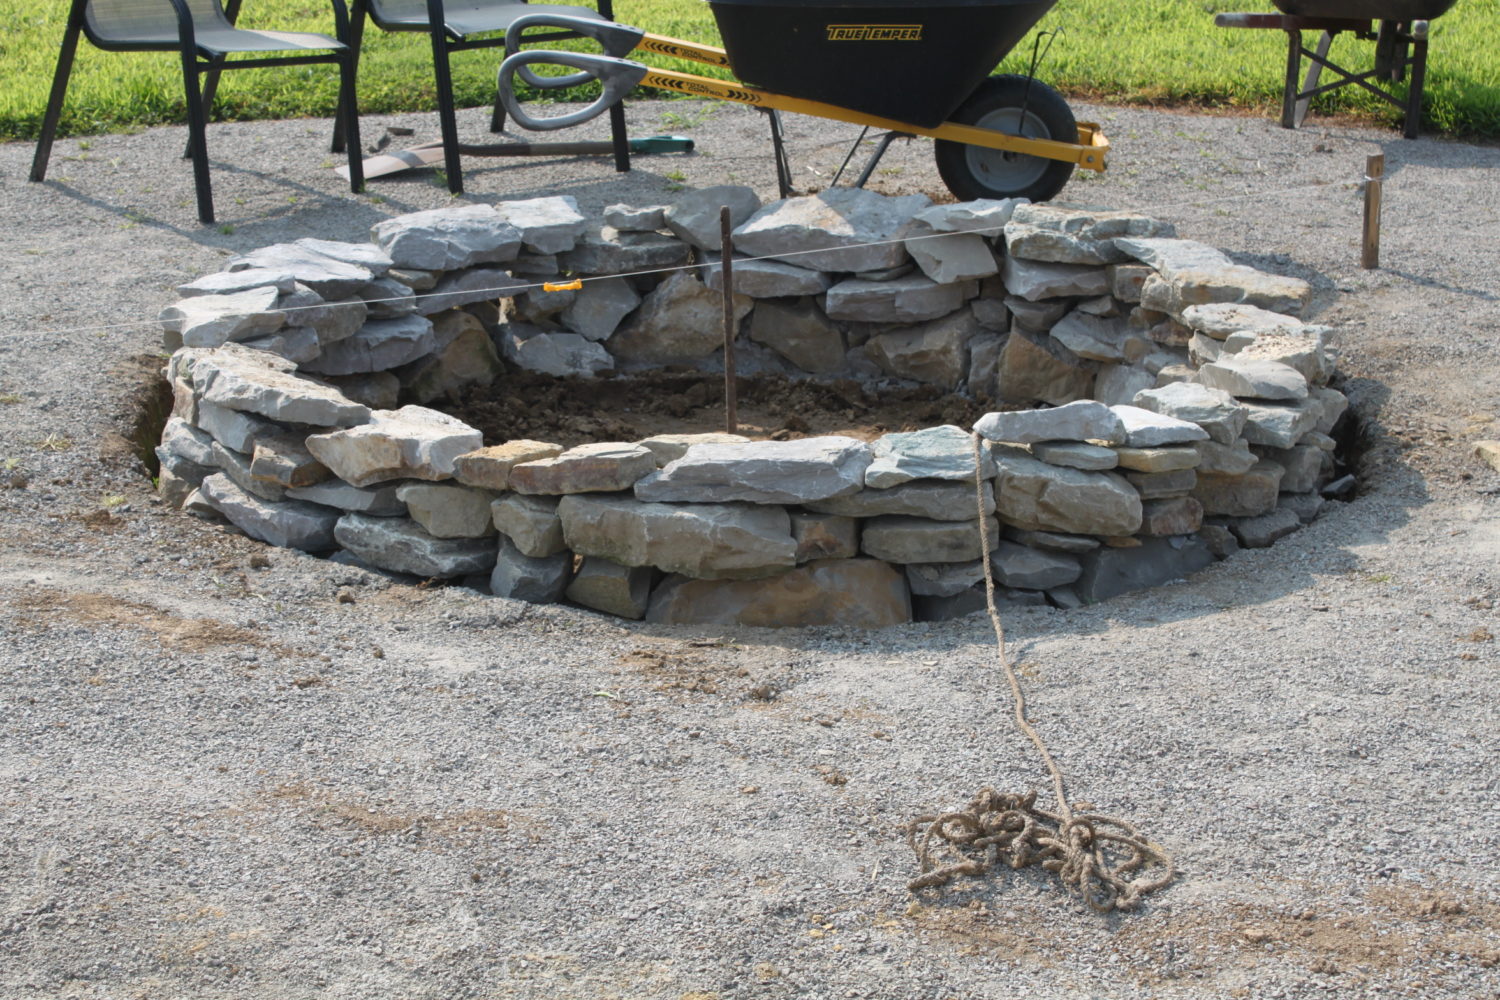 Building Fire Pit With Rocks Fire pit rock stone backyard build rap rip level create used string sure keep final inexpensive beautiful course found oldworldgardenfarms